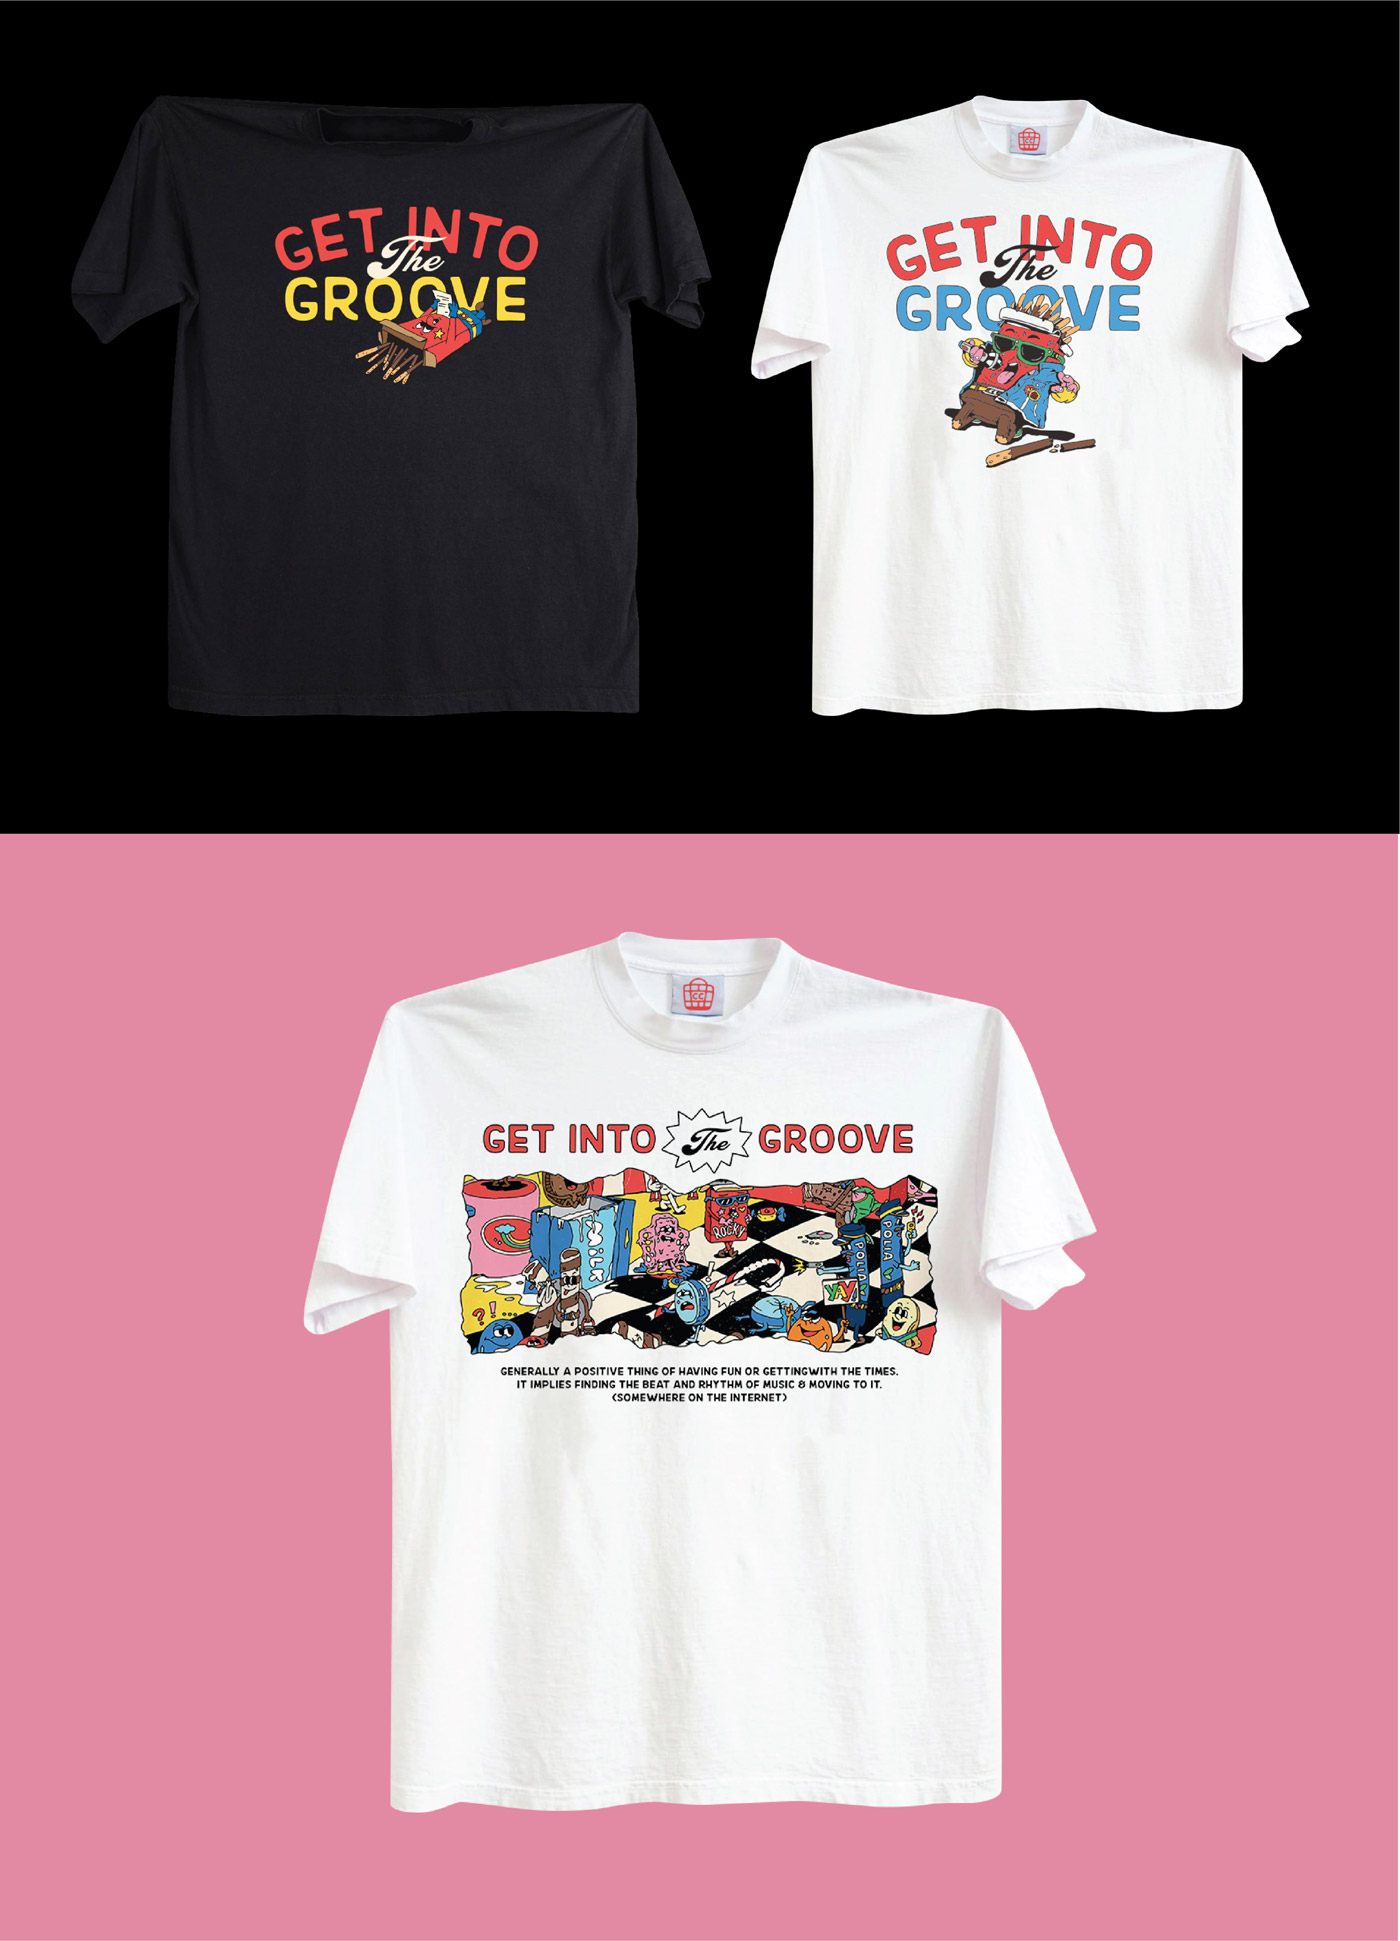 INTO THE GROOVE illustration project by Chochoi Creative